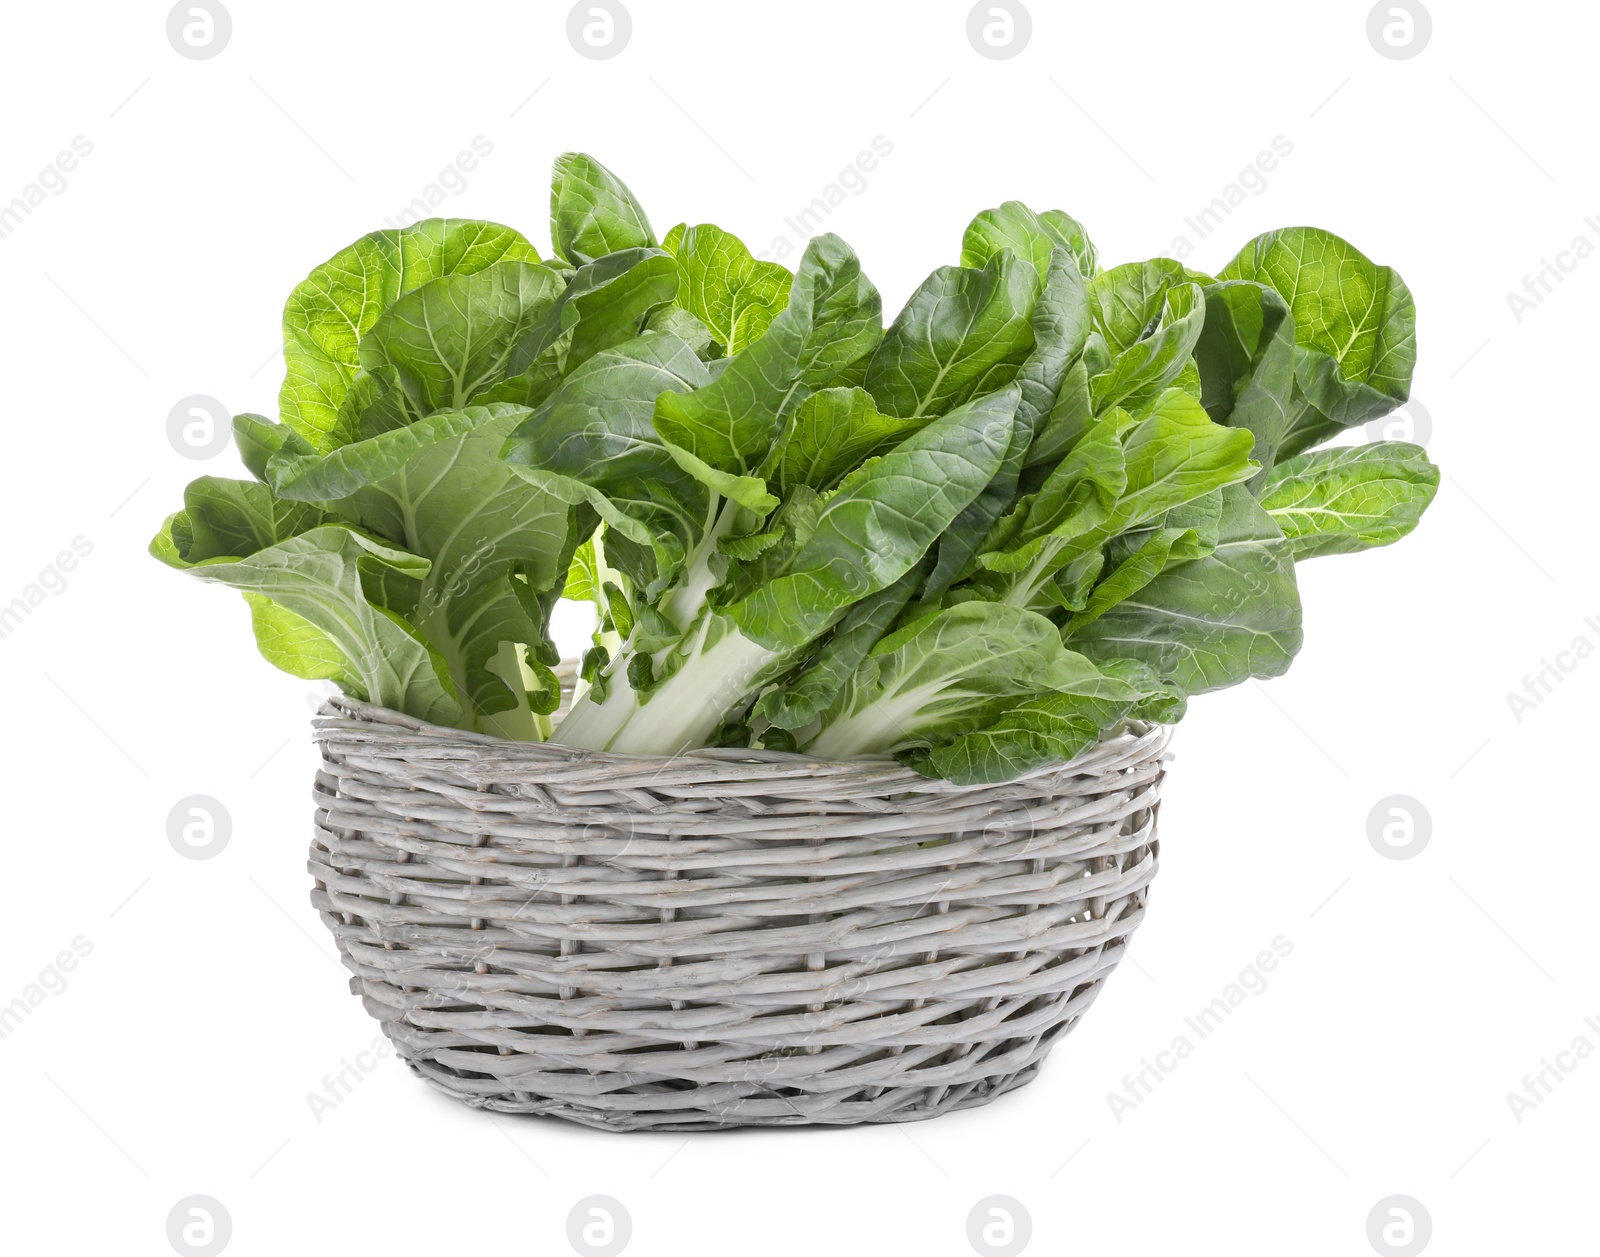 Photo of Fresh green pak choy cabbages in wicker basket on white background